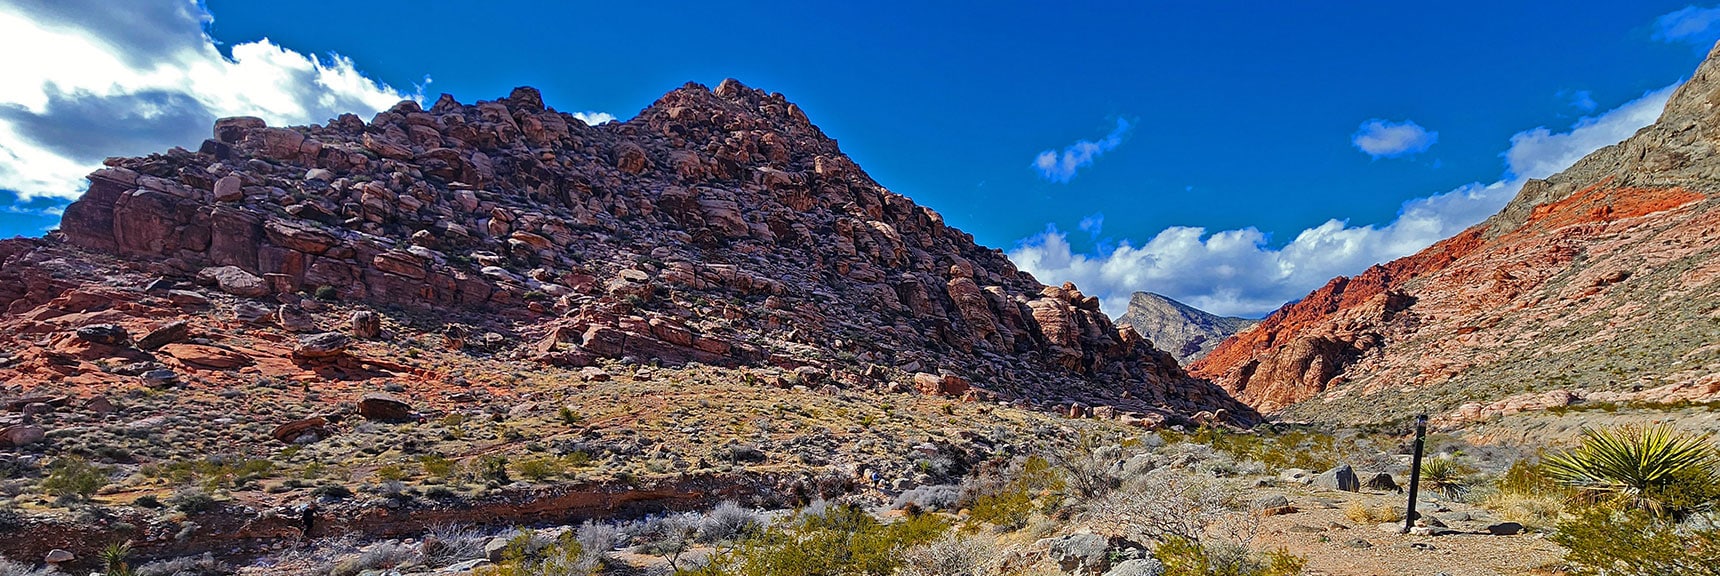 View Back to Southeast Corner of Kraft Mt. Turtlehead Peak Seen Up Gateway Canyon | Calico Basin Daily Workout Trails | Calico Basin, Nevada